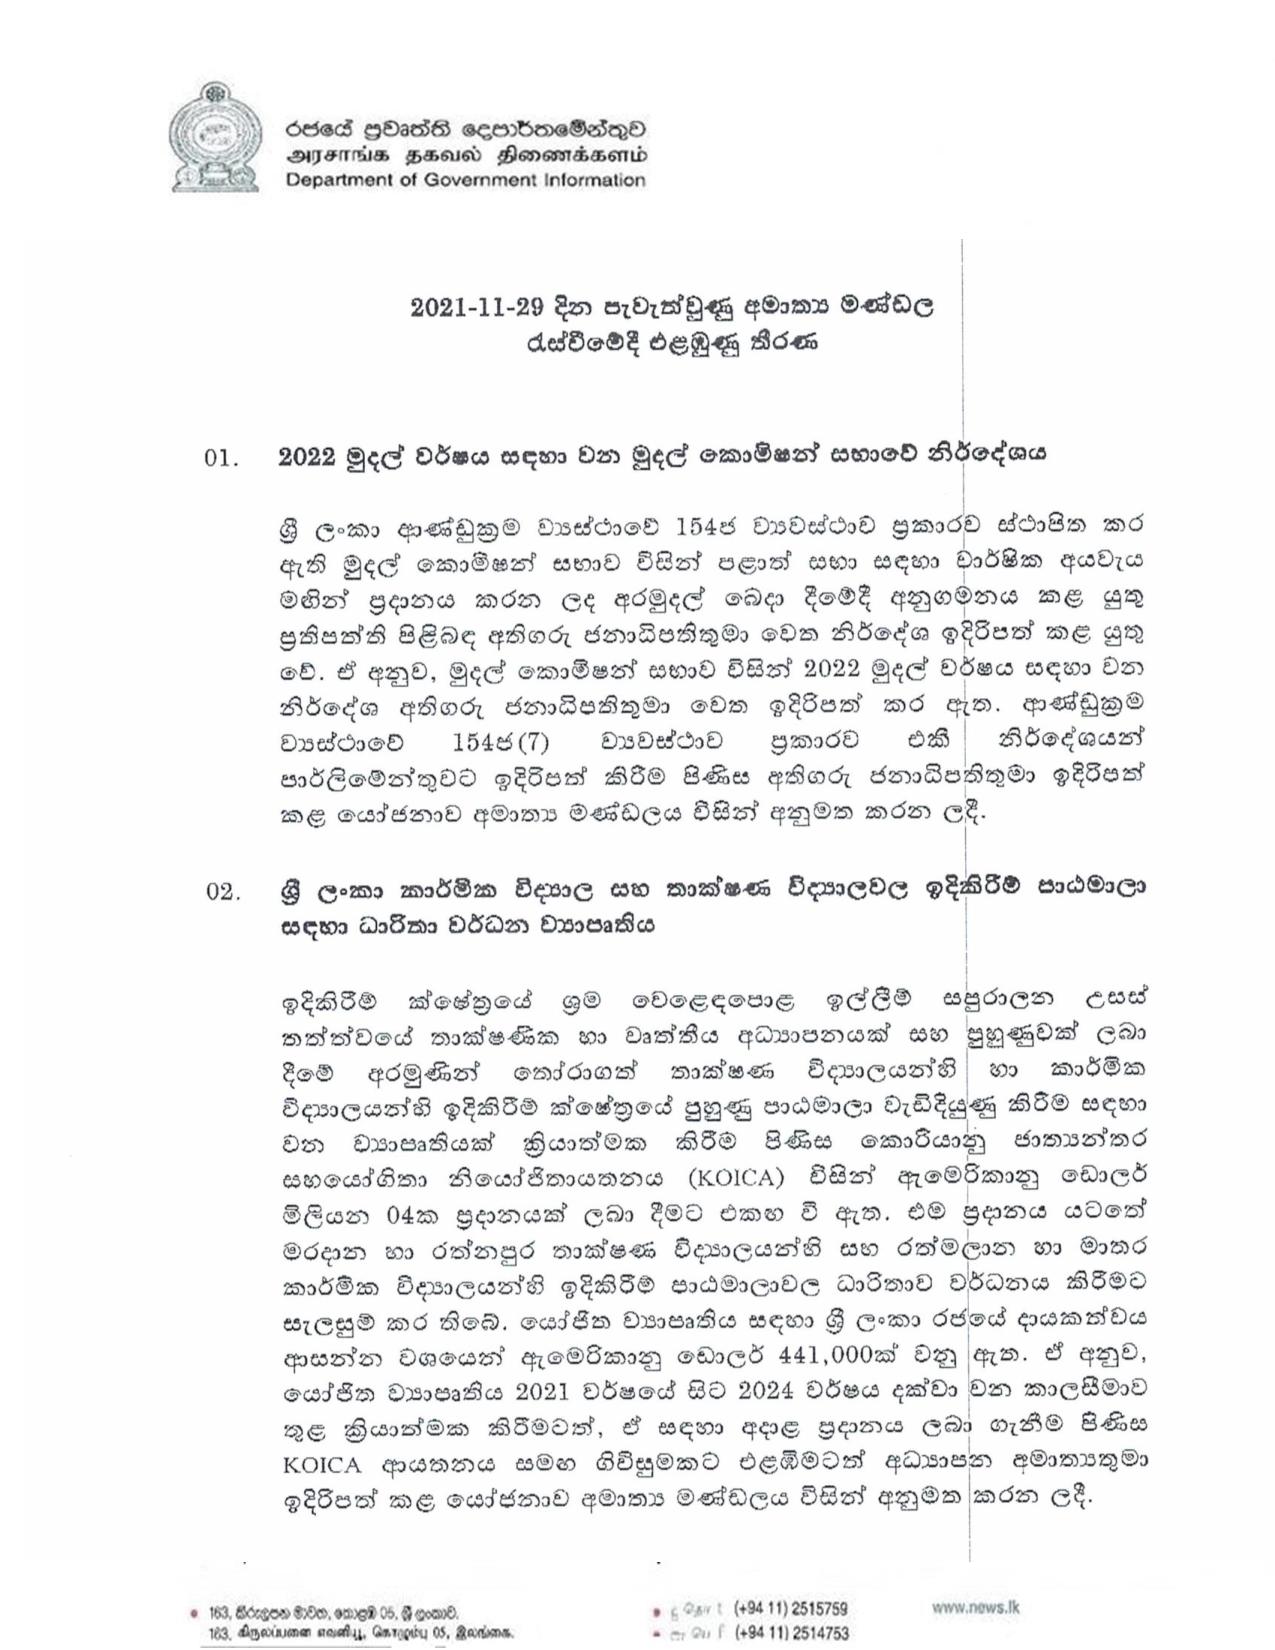 Cabinet Decisions on 29.11.2021 page 001